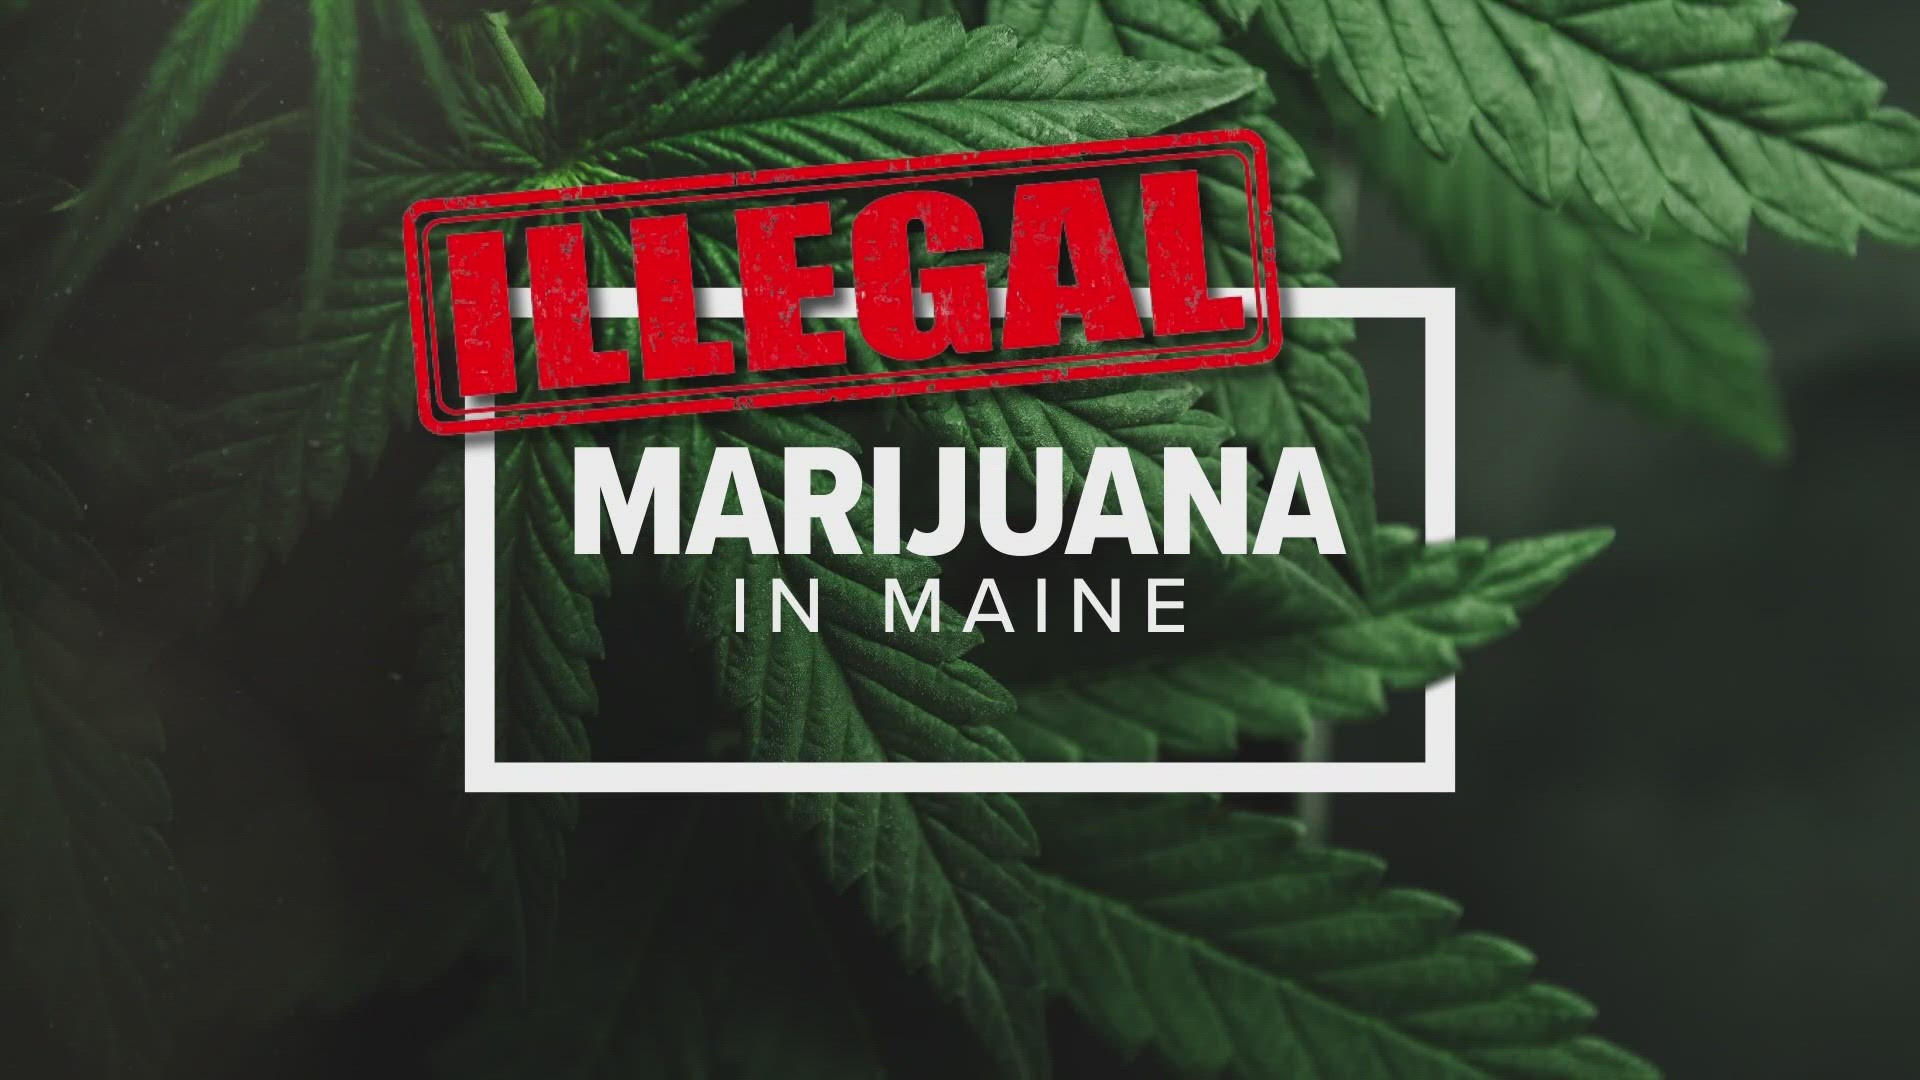 Xisen Guo is the first to face a federal charge in connection with a sprawling investigation into illegal marijuana growing operations in Maine.